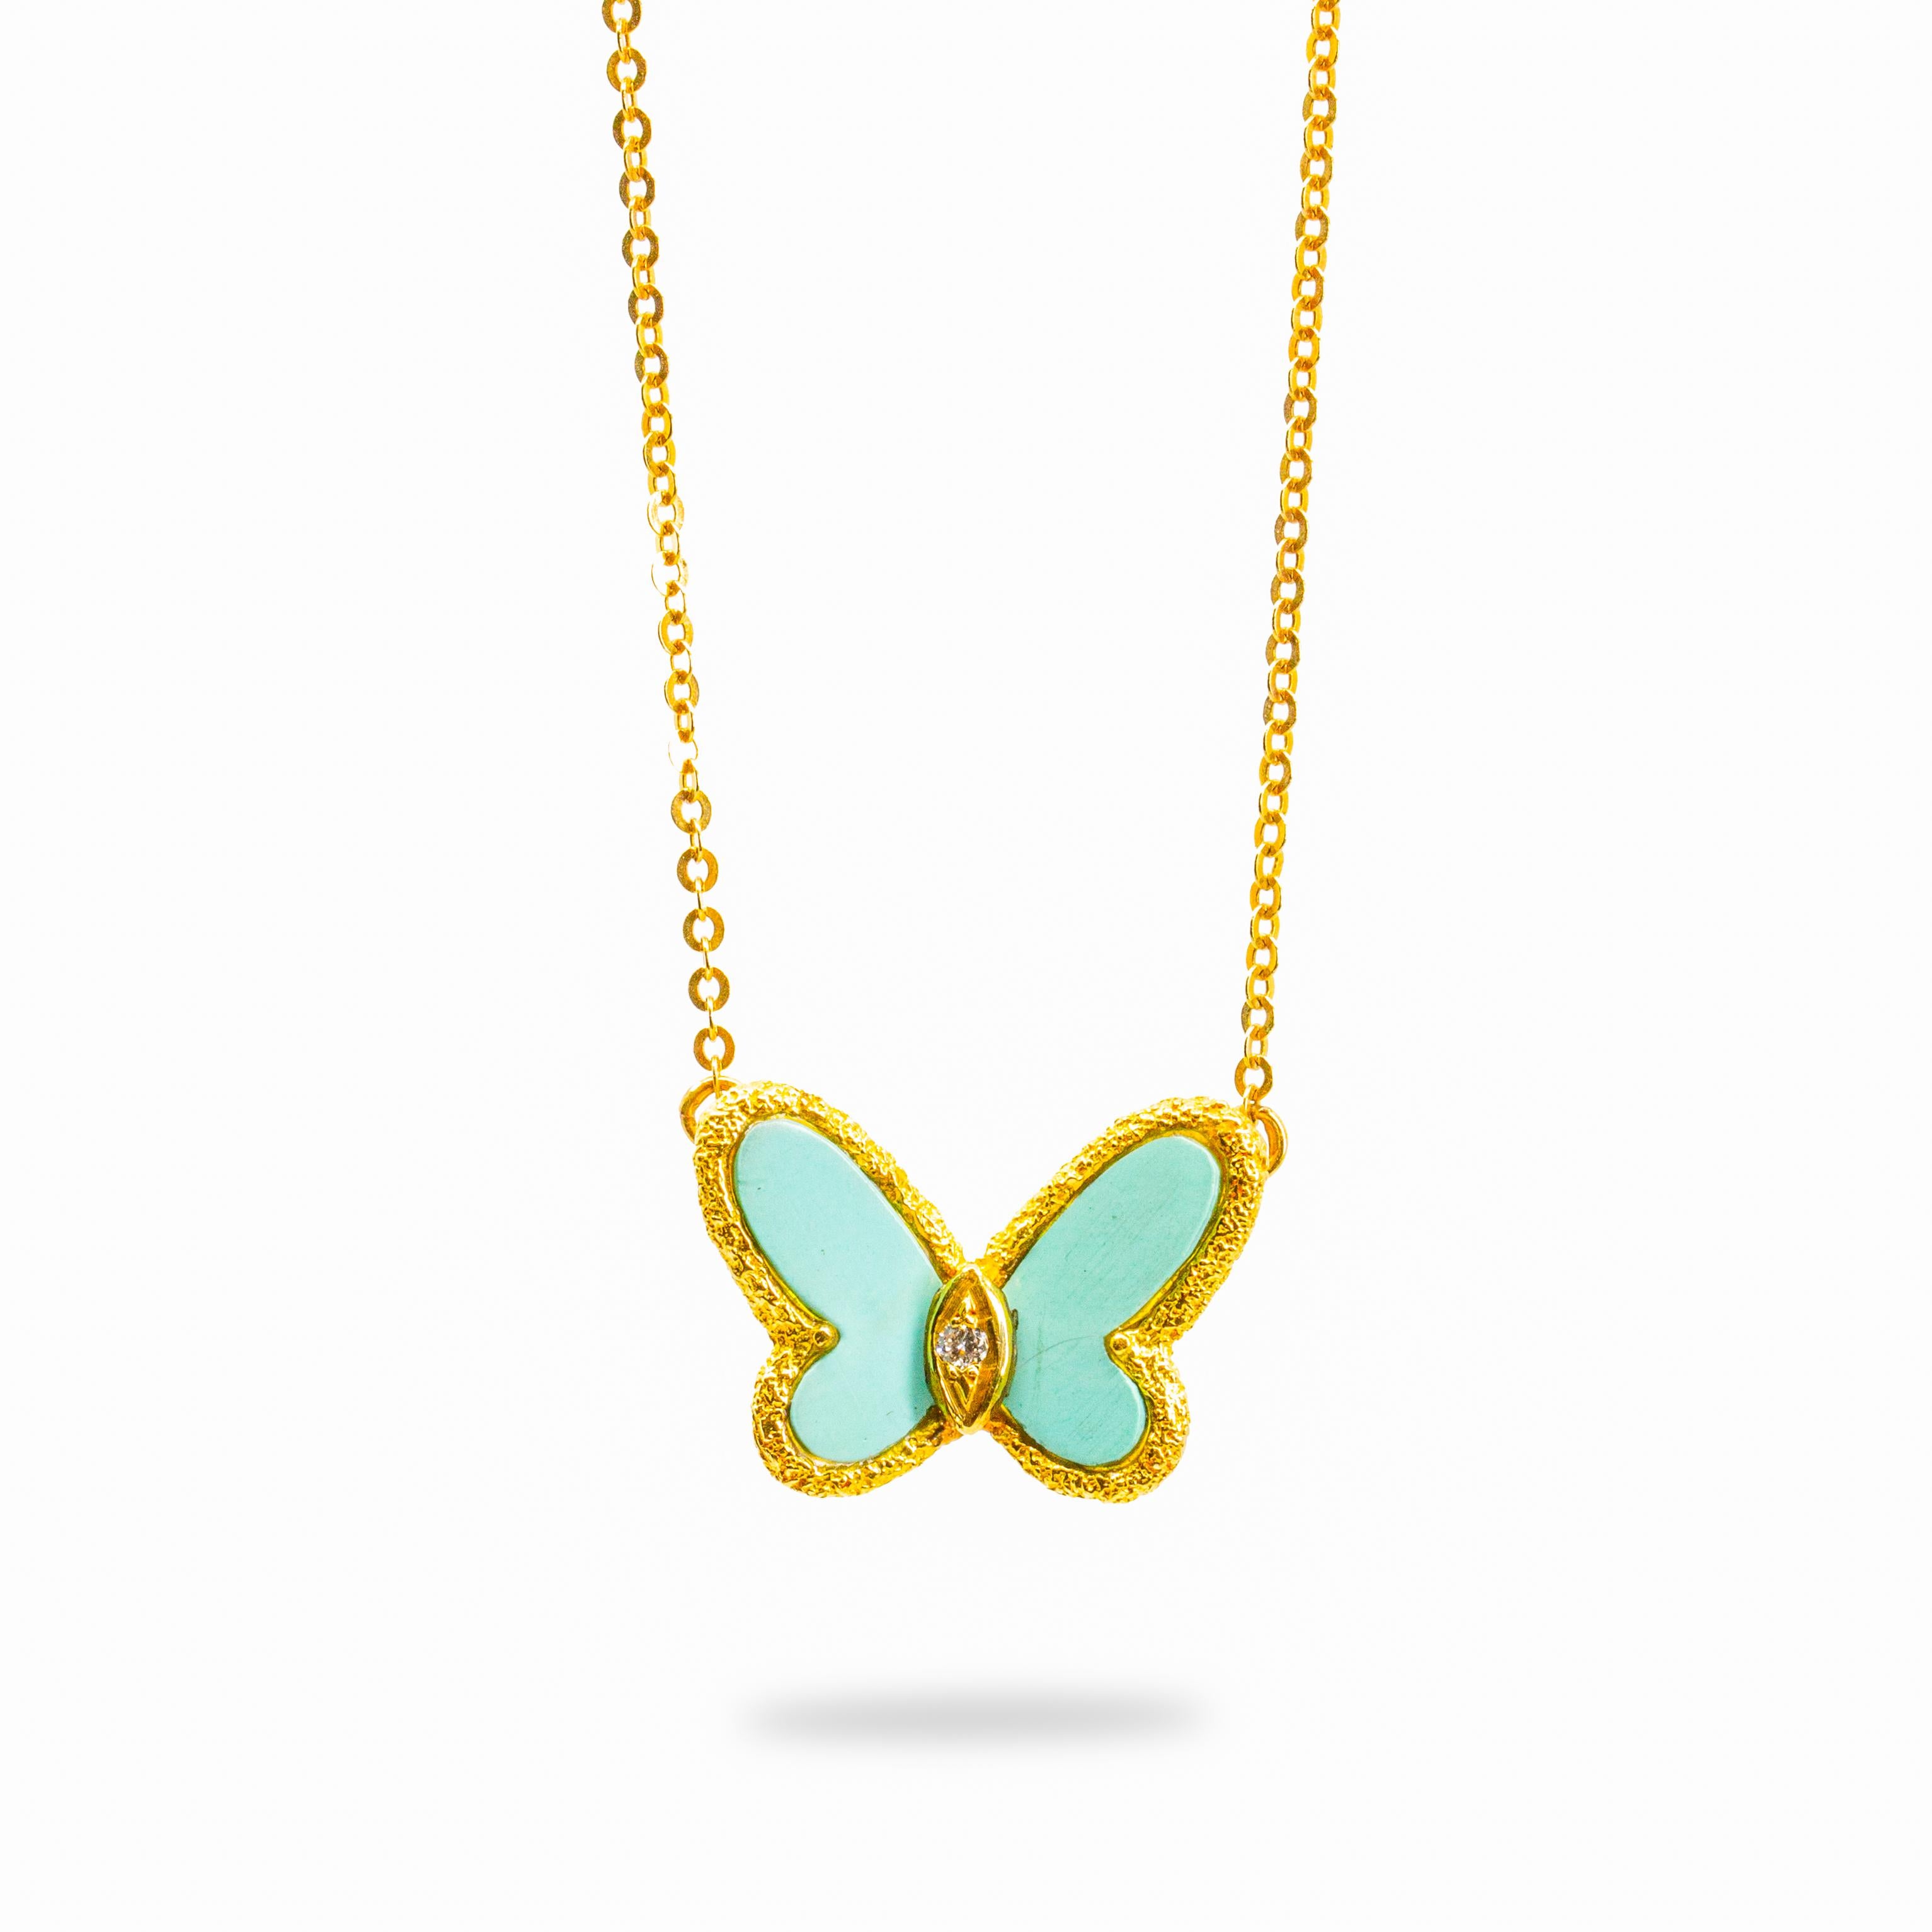 Offered is a Van Cleef & Arpels, New York, Turquoise and Diamond Butterfly 'Alhambra' Necklace containing two carved turquoise plaques and one round brilliant cut diamond. Stamp: VCA NY 18K 4V477-244. 3.50 dwts.

About VCA:

In 1896, Esther Arpels,